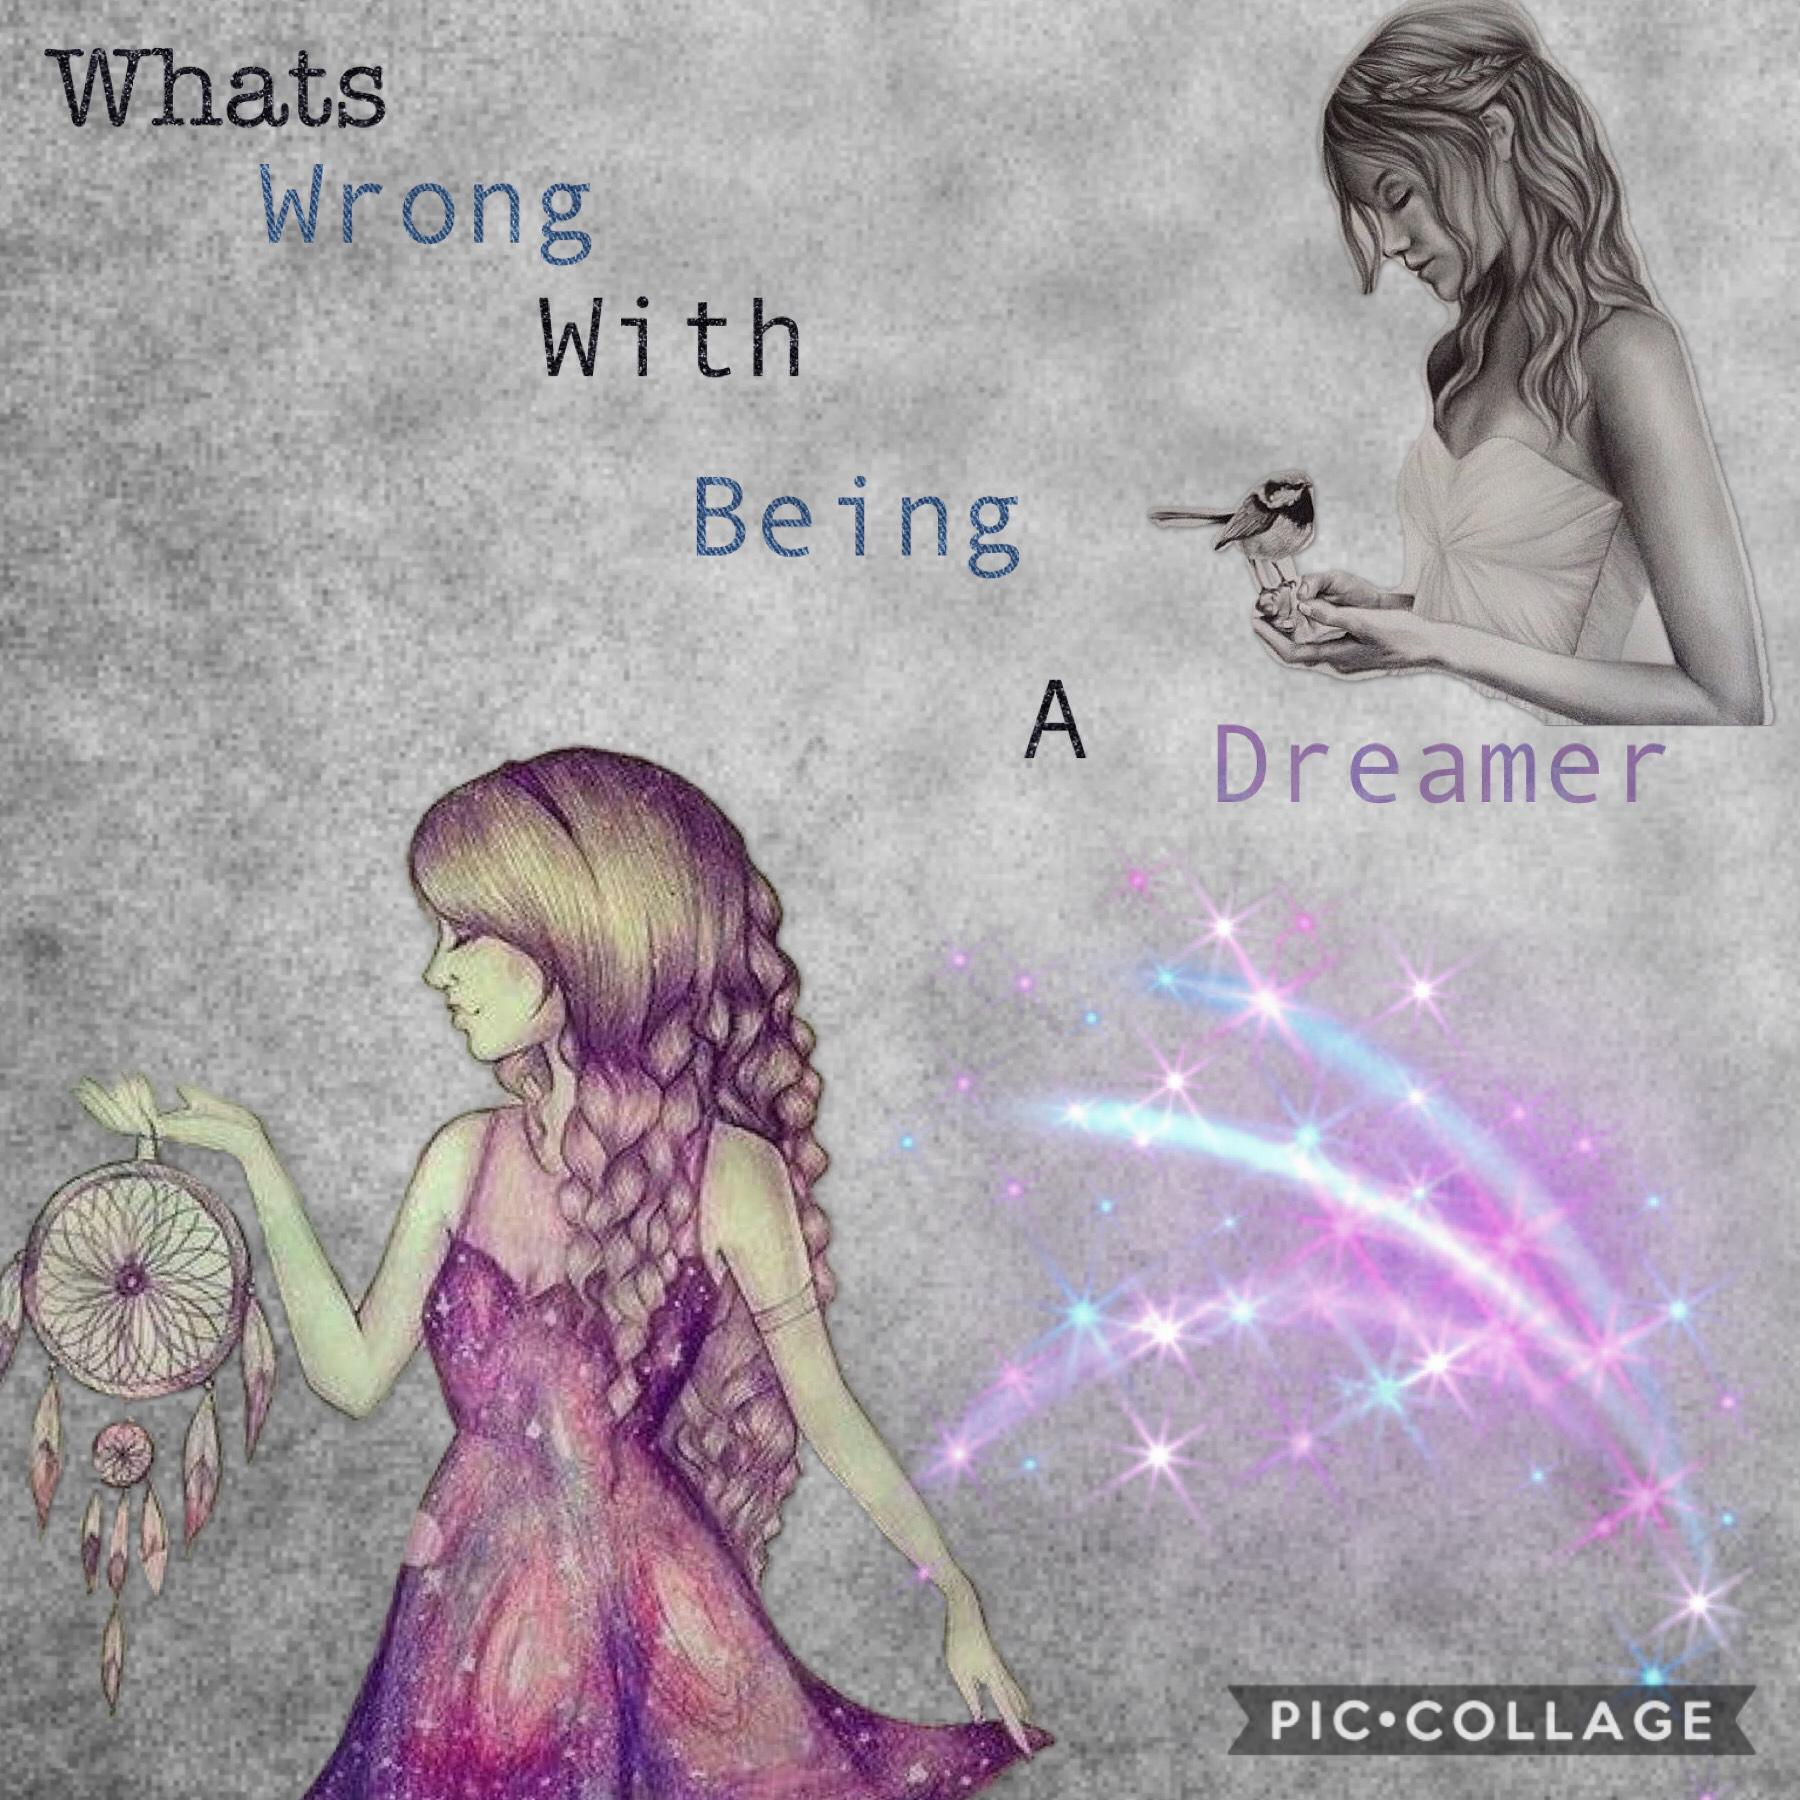 Who is a dreamer